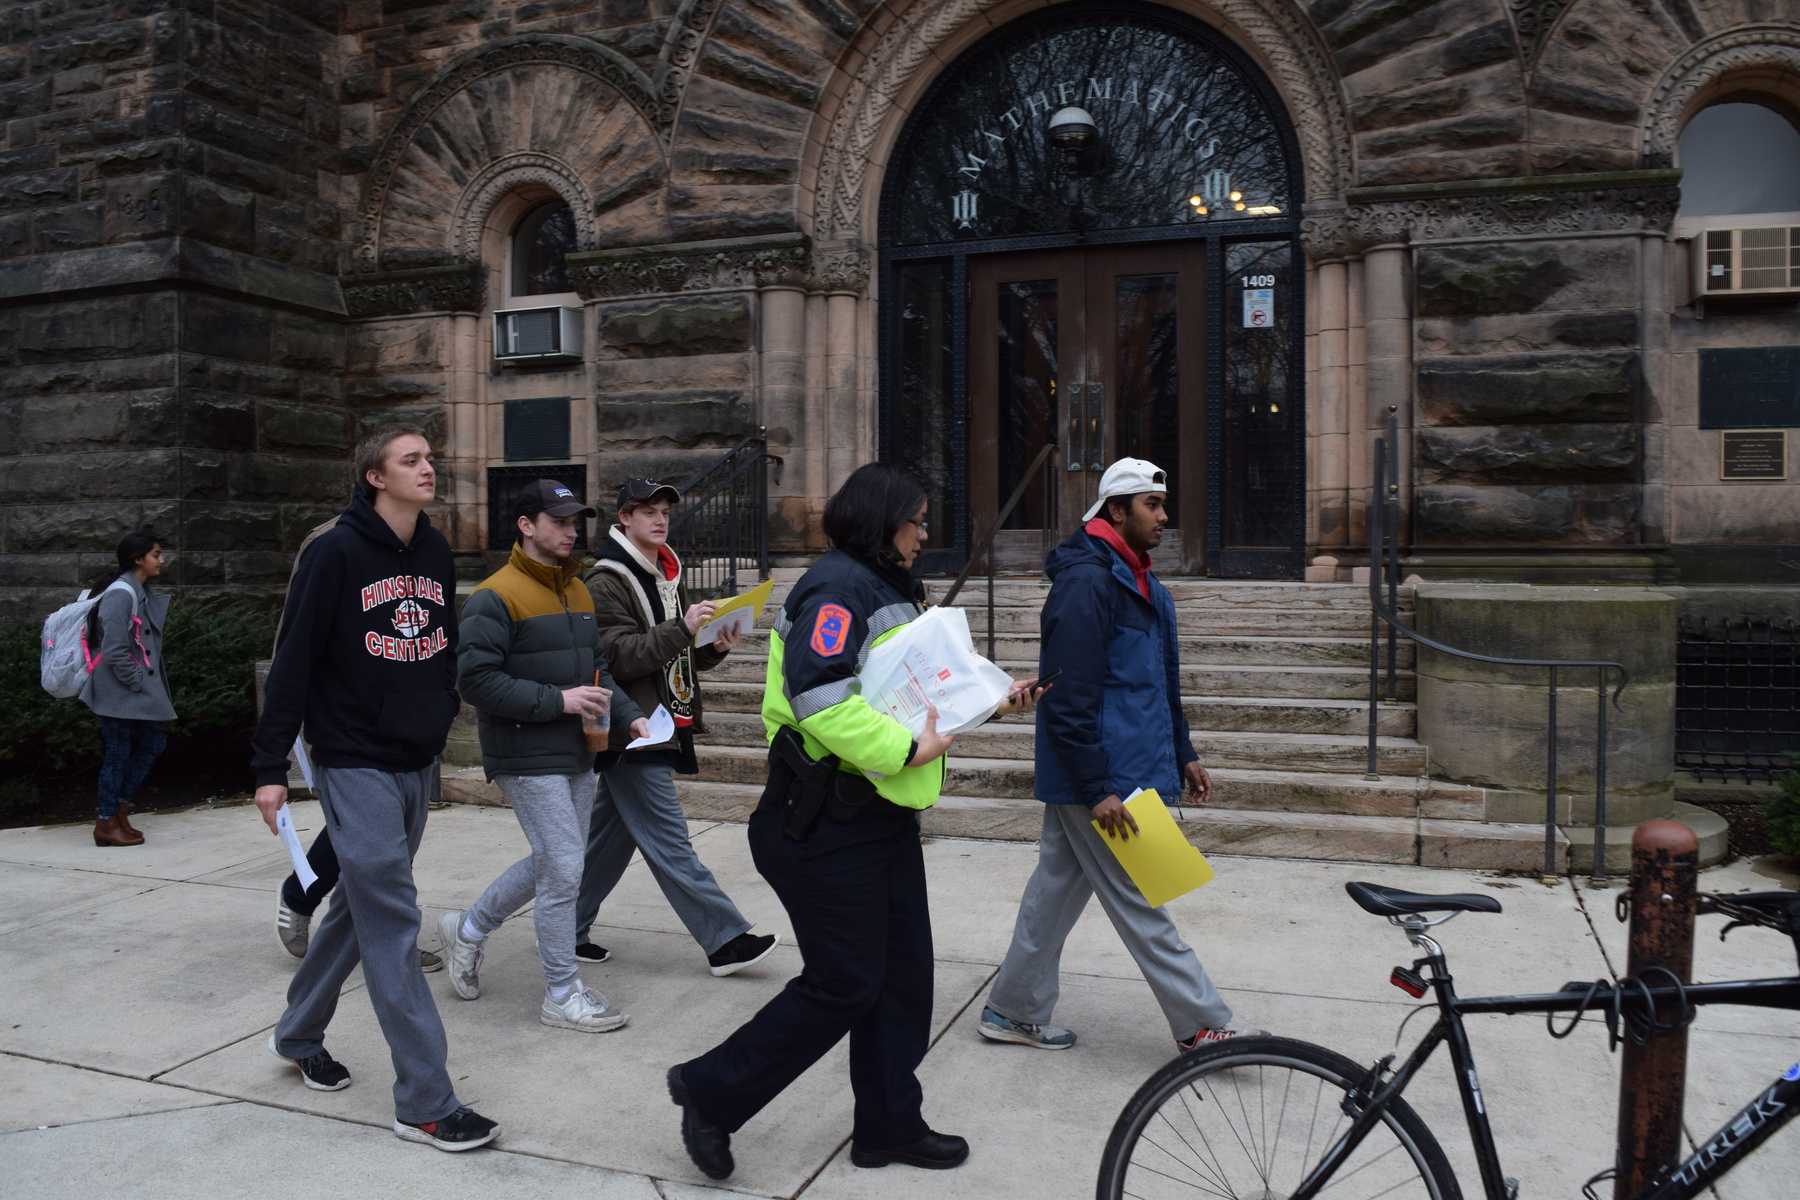 U. of I. Police Lt. Joan Fiesta and members of the Delta Tau Delta fraternity walking together to deliver safety information to students